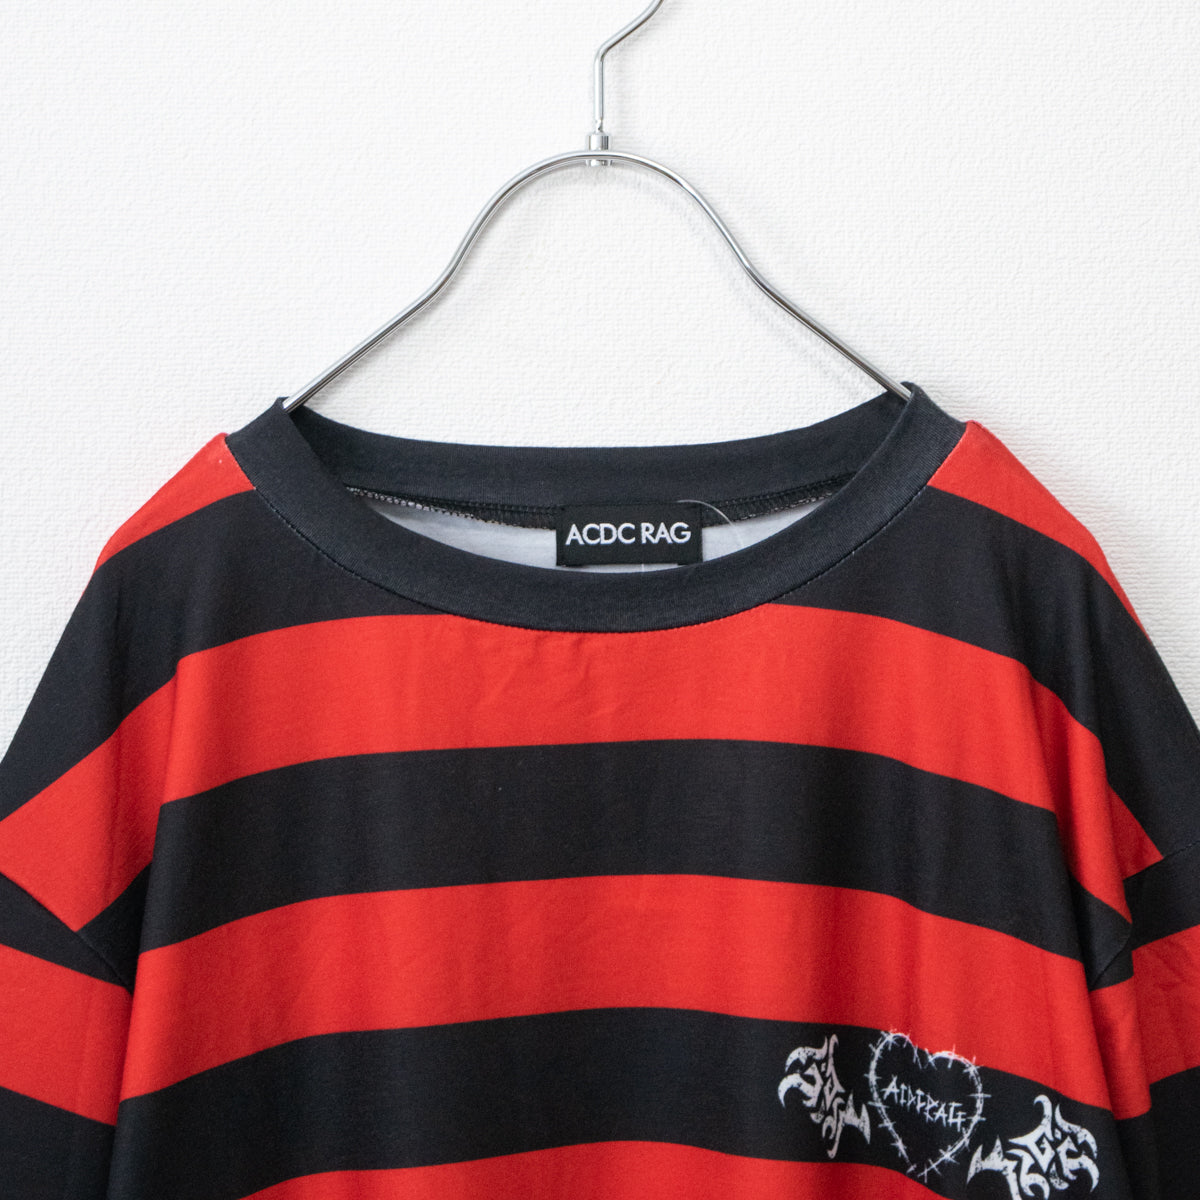 ACDC Rag Wing Heart Big T-shirt Black/Red Border - YOUAREMYPOISON